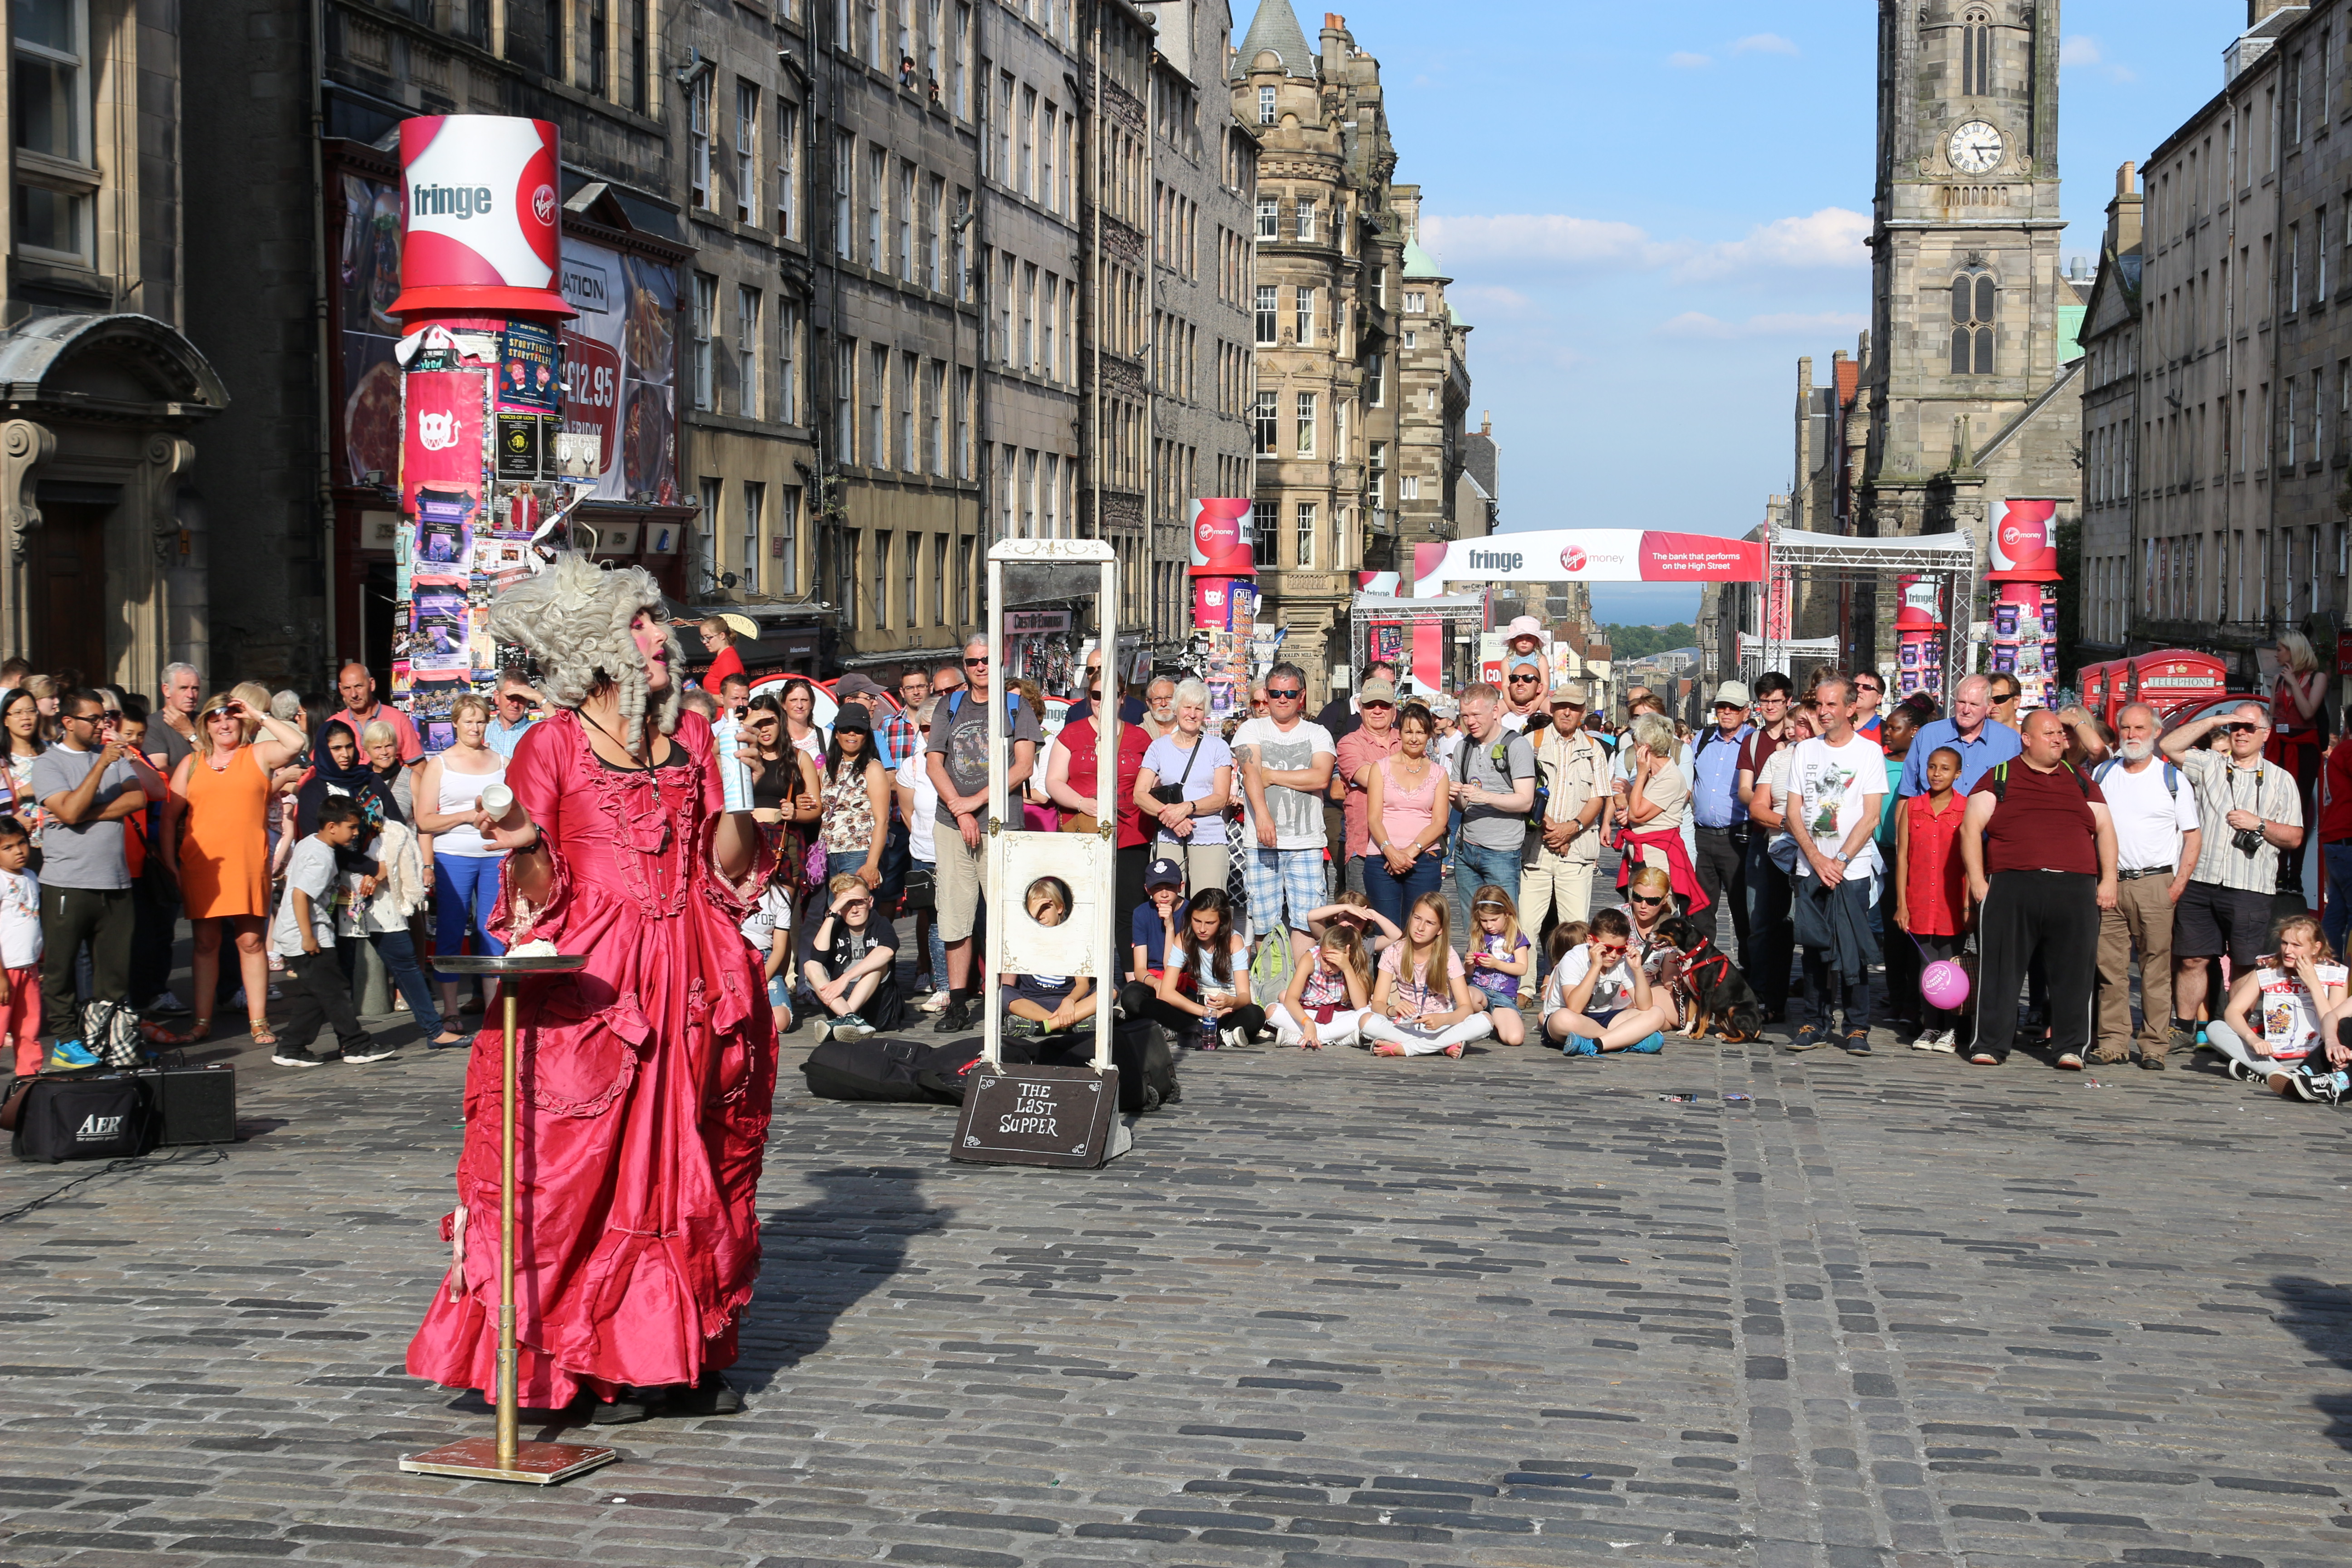 Thinking about Edinburgh Festival Rentals - Why Dickins?